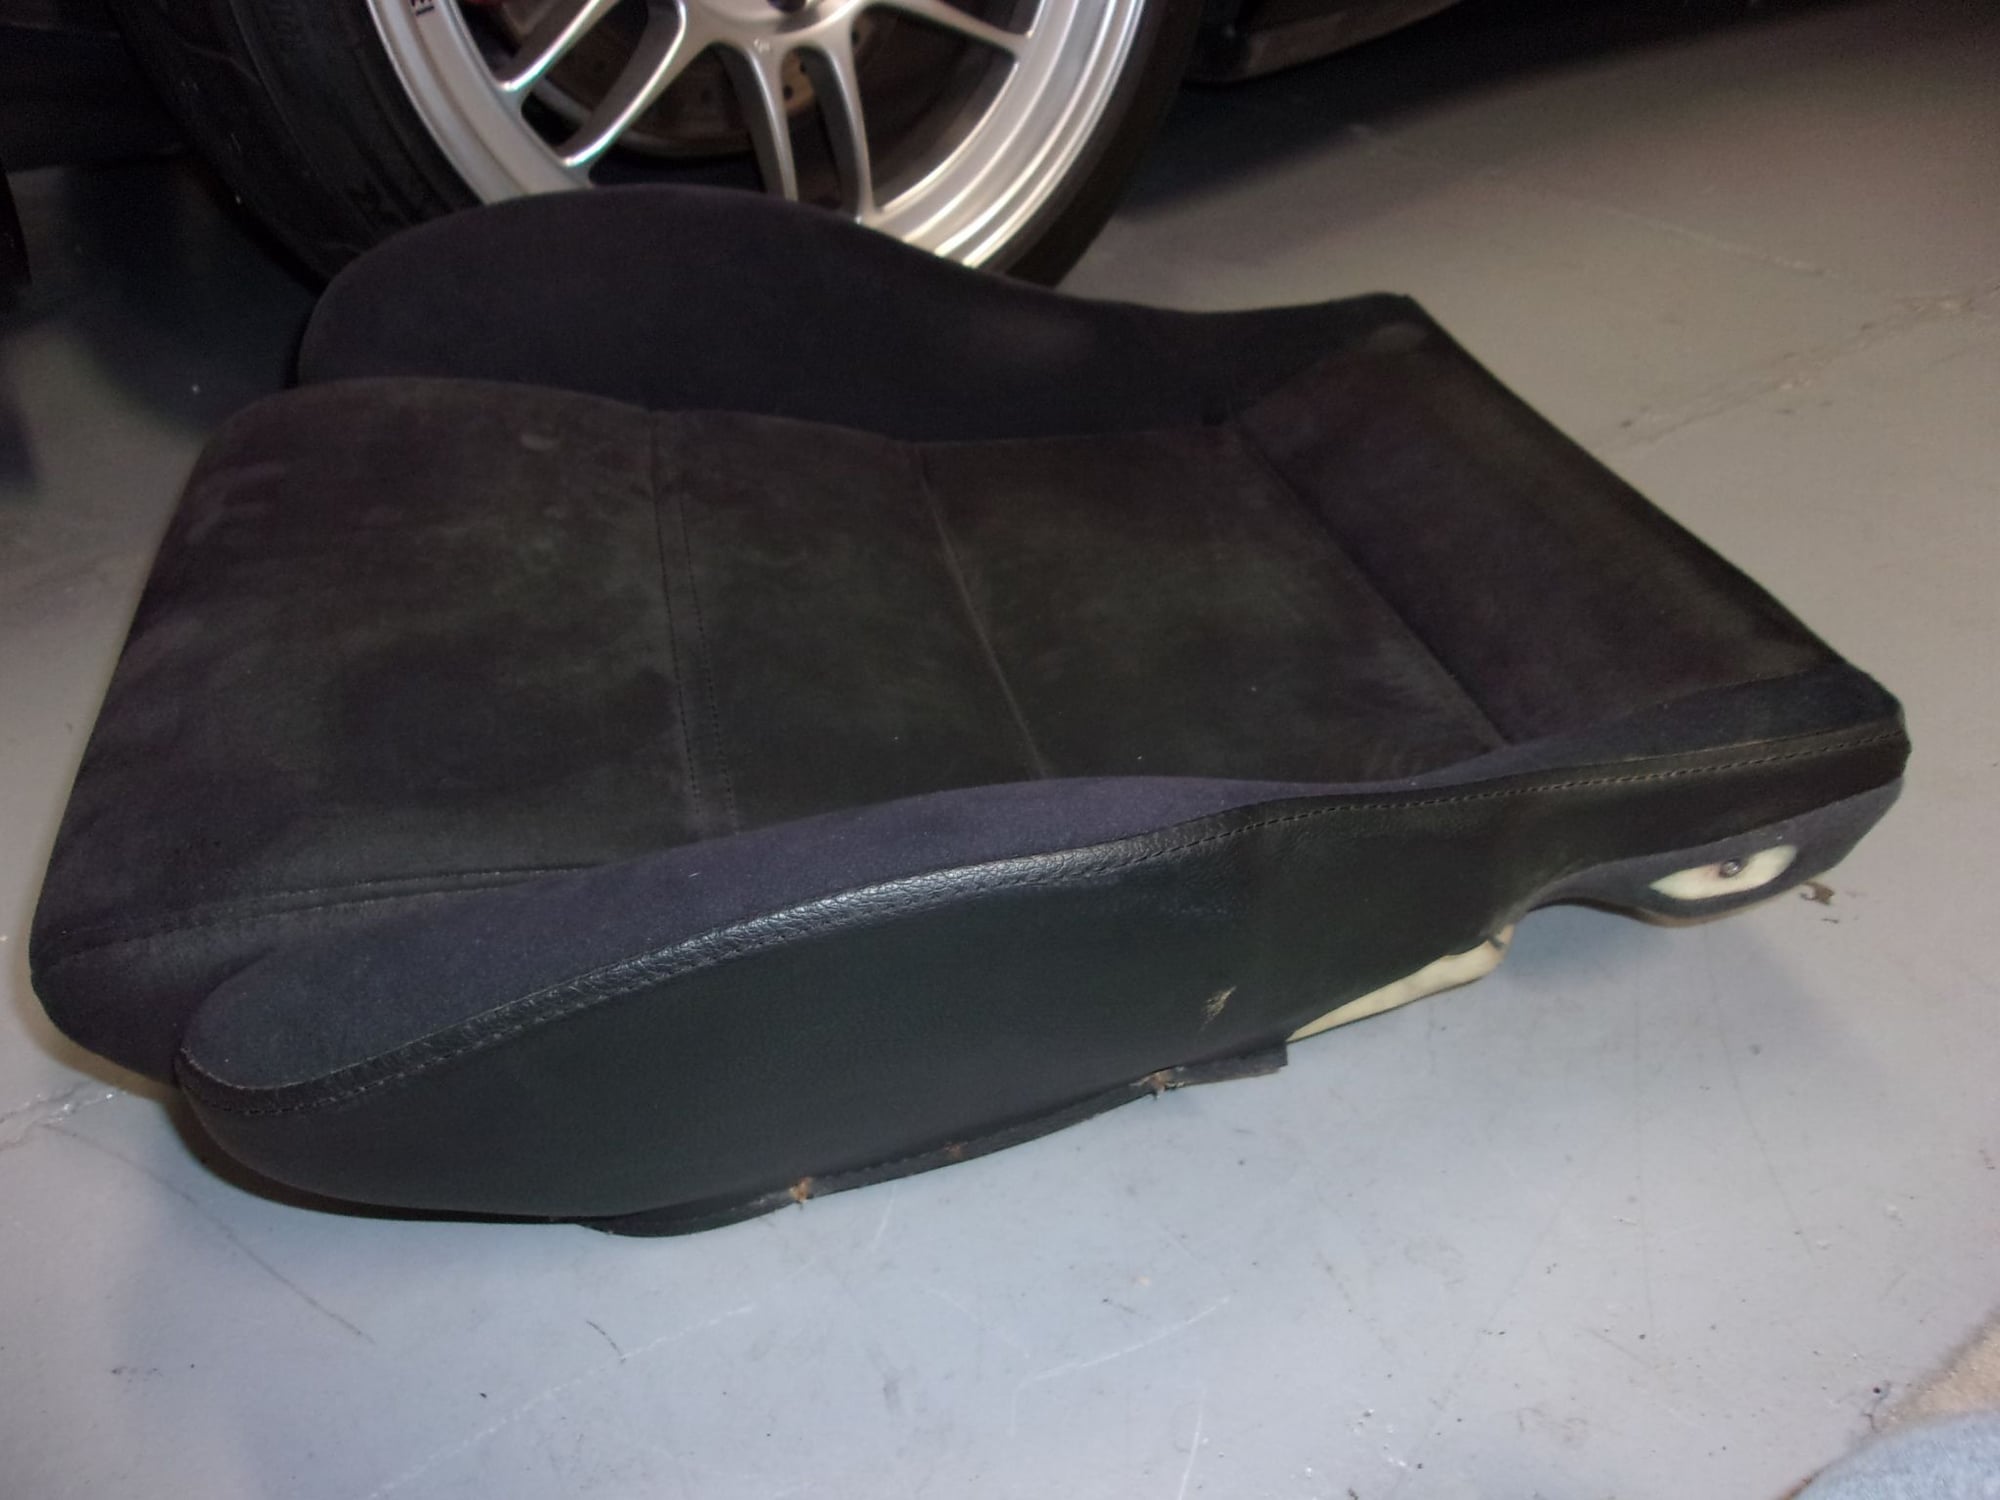 Interior/Upholstery - R1 Suede Seat Bottom - Used - 1993 to 1995 Mazda RX-7 - Murfreesboro, TN 37130, United States